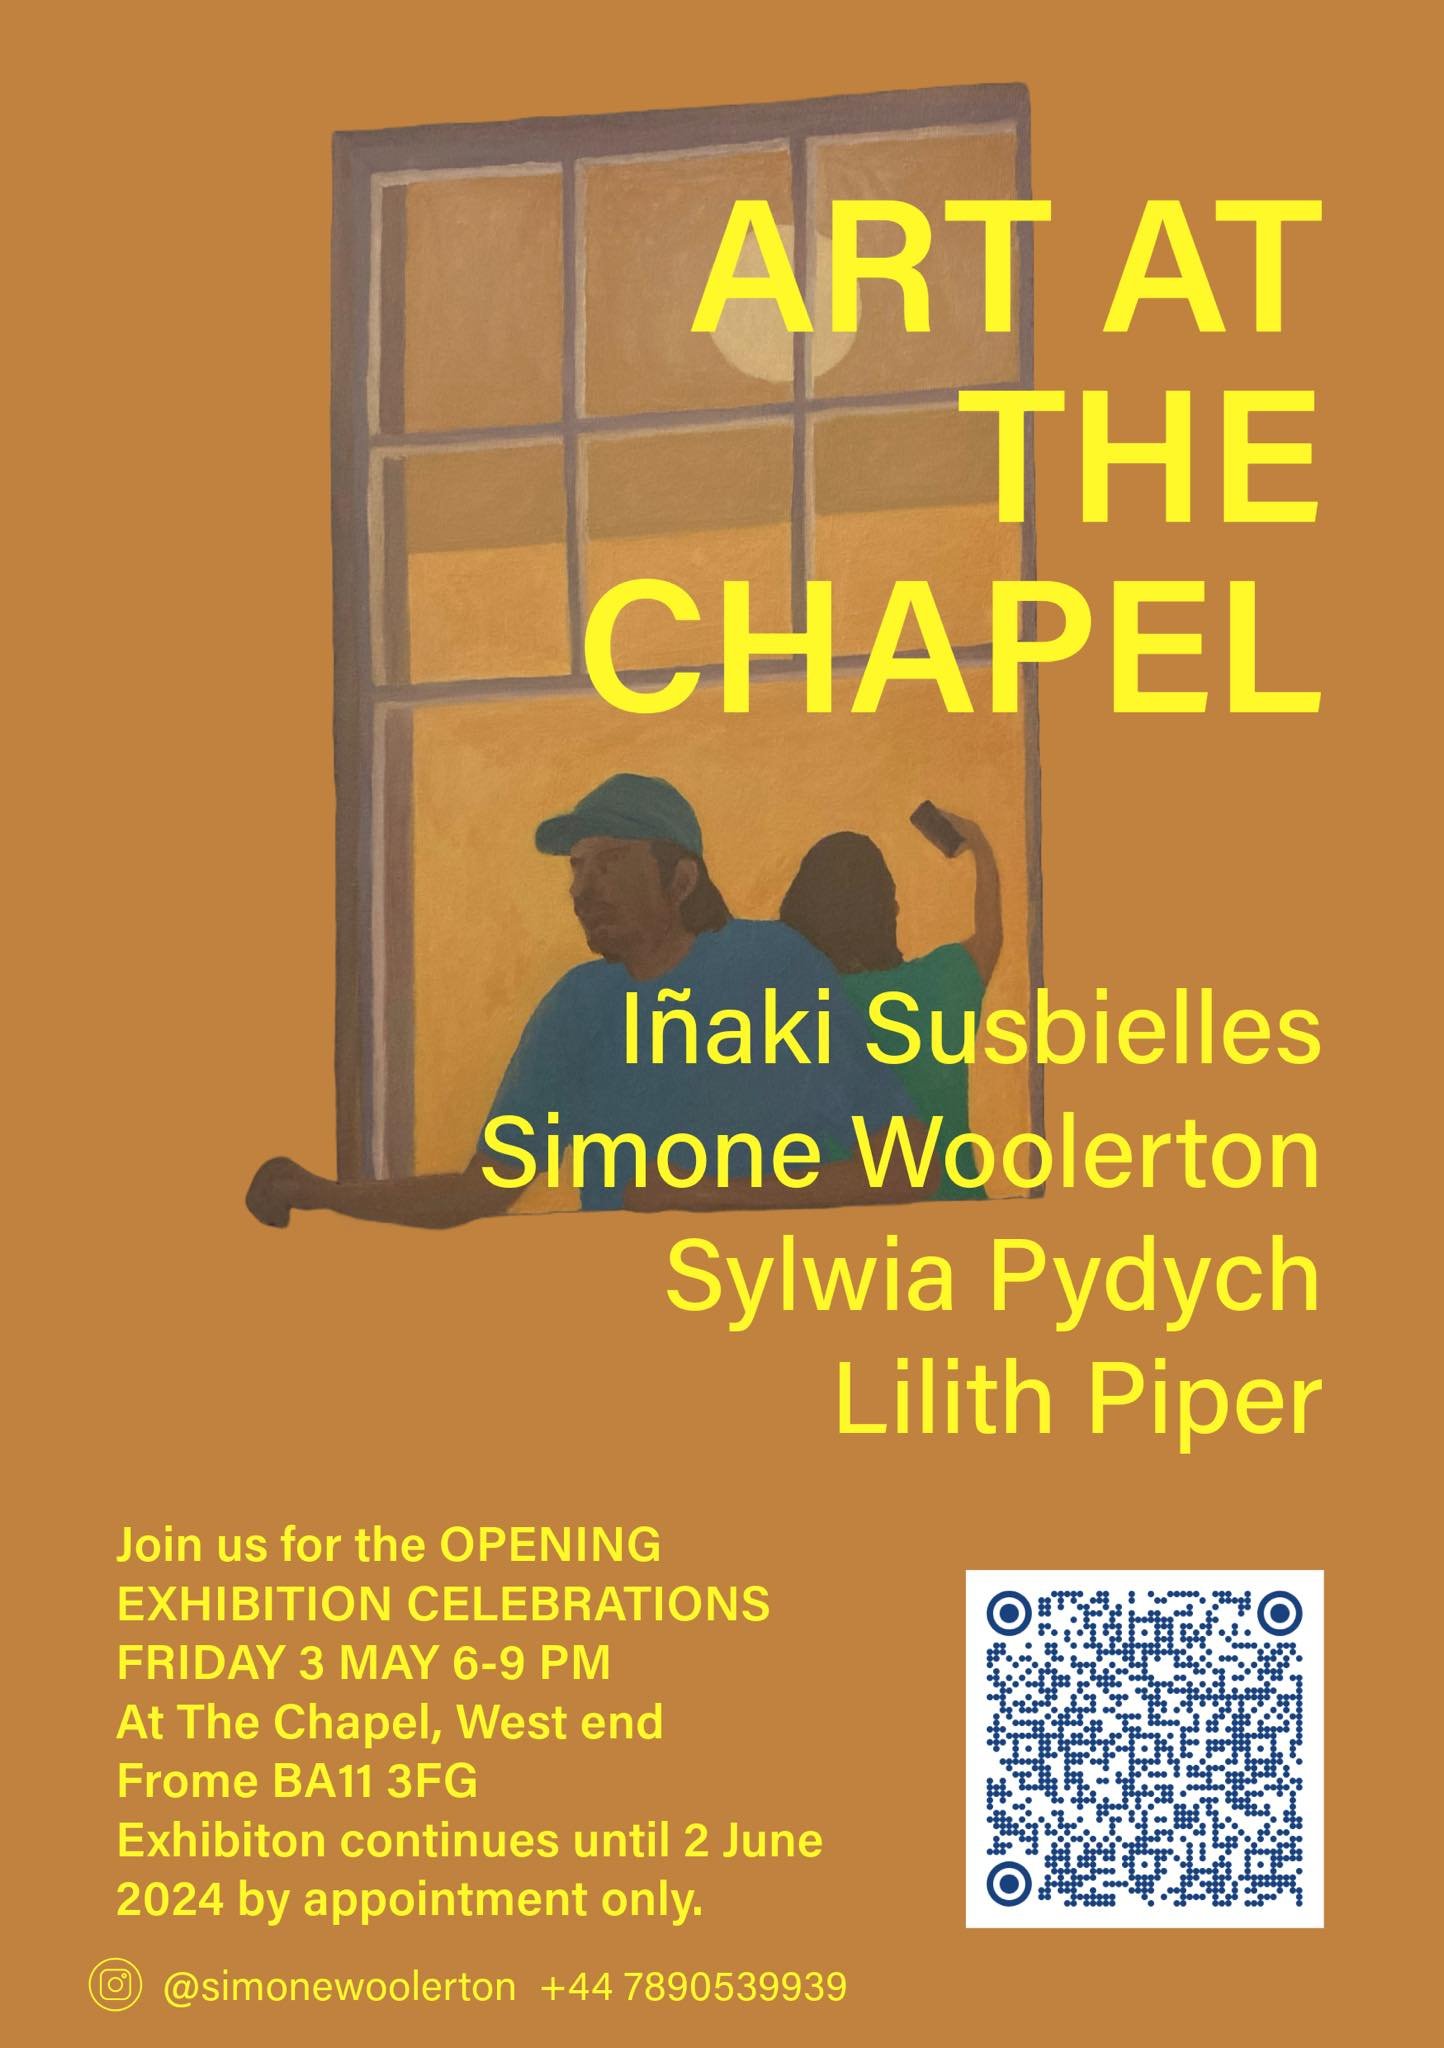 Opening exhibition this Friday 3 May 6-9pm Frome, Somerset 

https://www.eventbrite.co.uk/e/opening-celebrations-art-at-the-chapel-tickets-887119818257?utm-campaign=social&amp;utm-content=attendeeshare&amp;utm-medium=discovery&amp;utm-term=listing&am